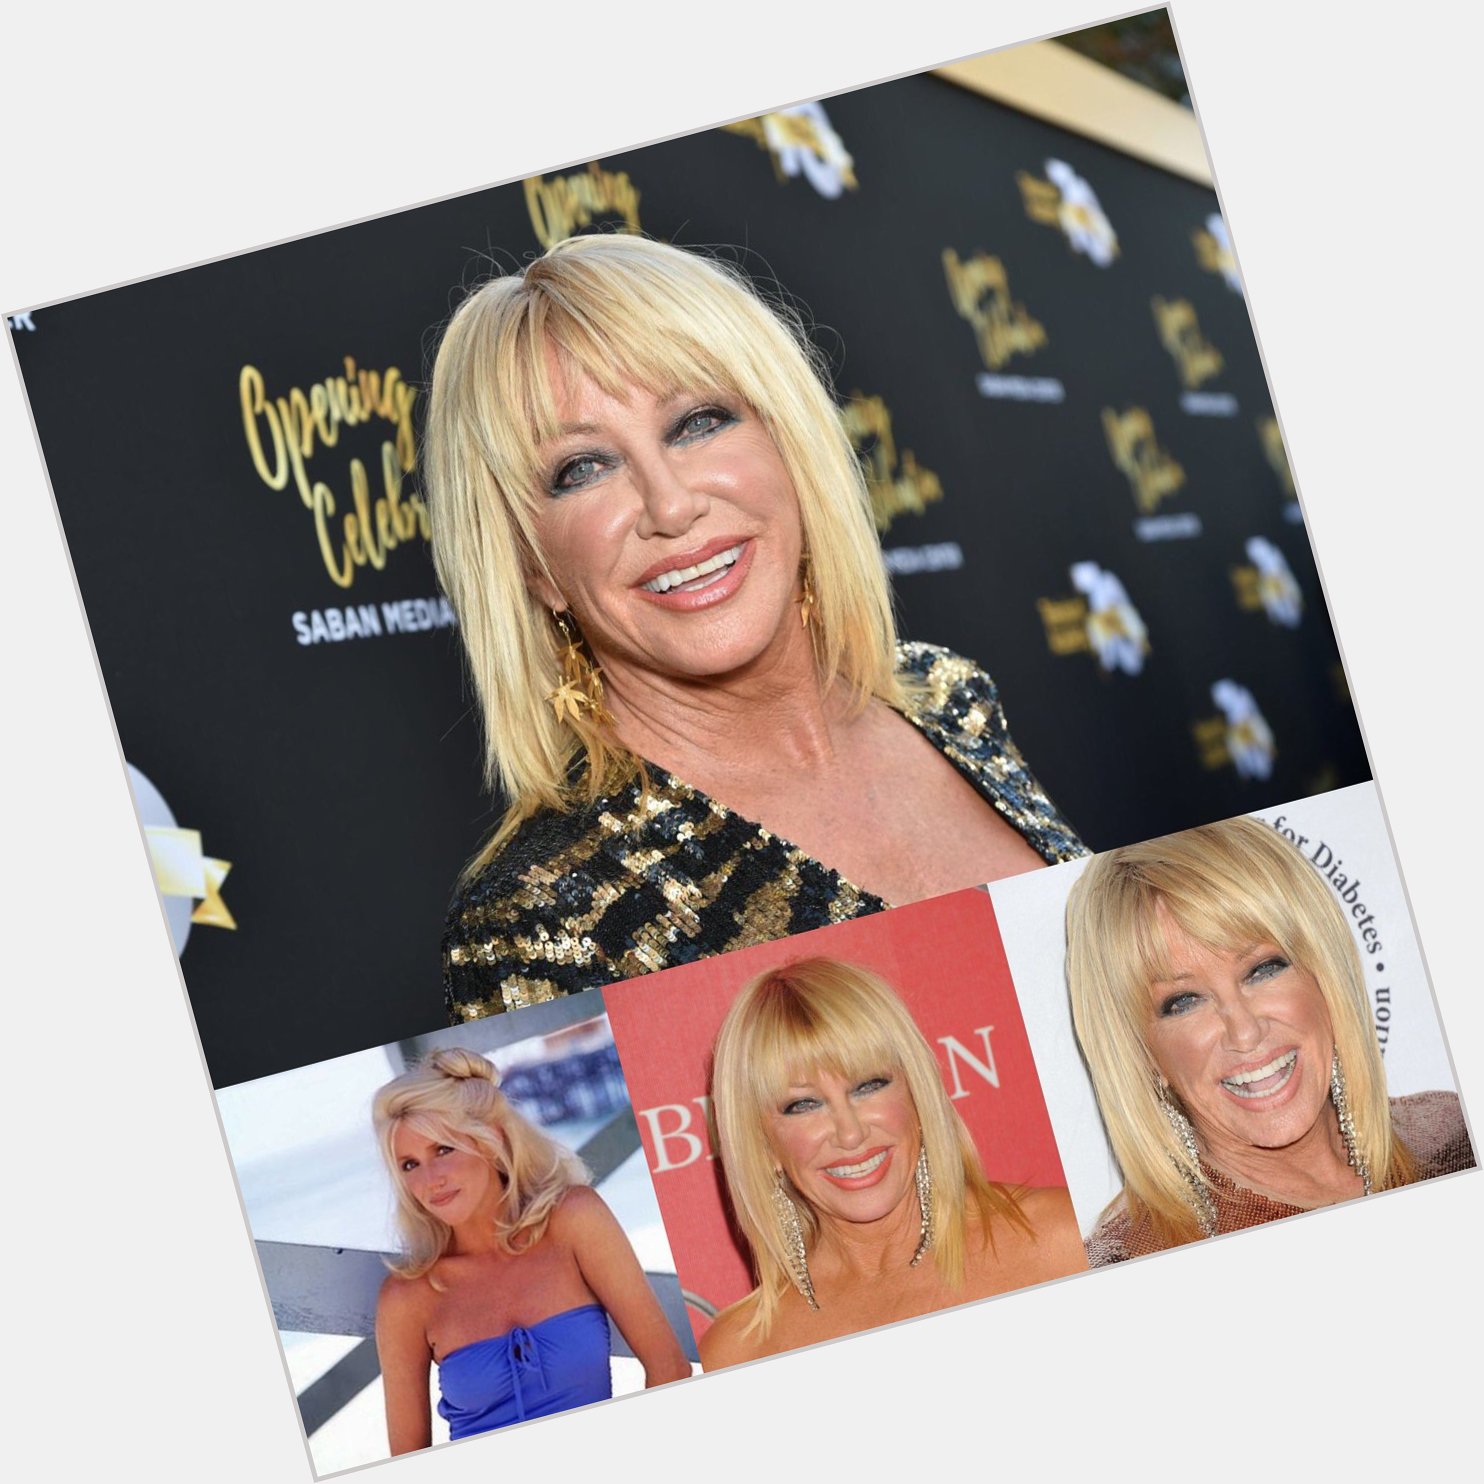 Happy 71 birthday to Suzanne Somers. Hope that she has a wonderful birthday.     